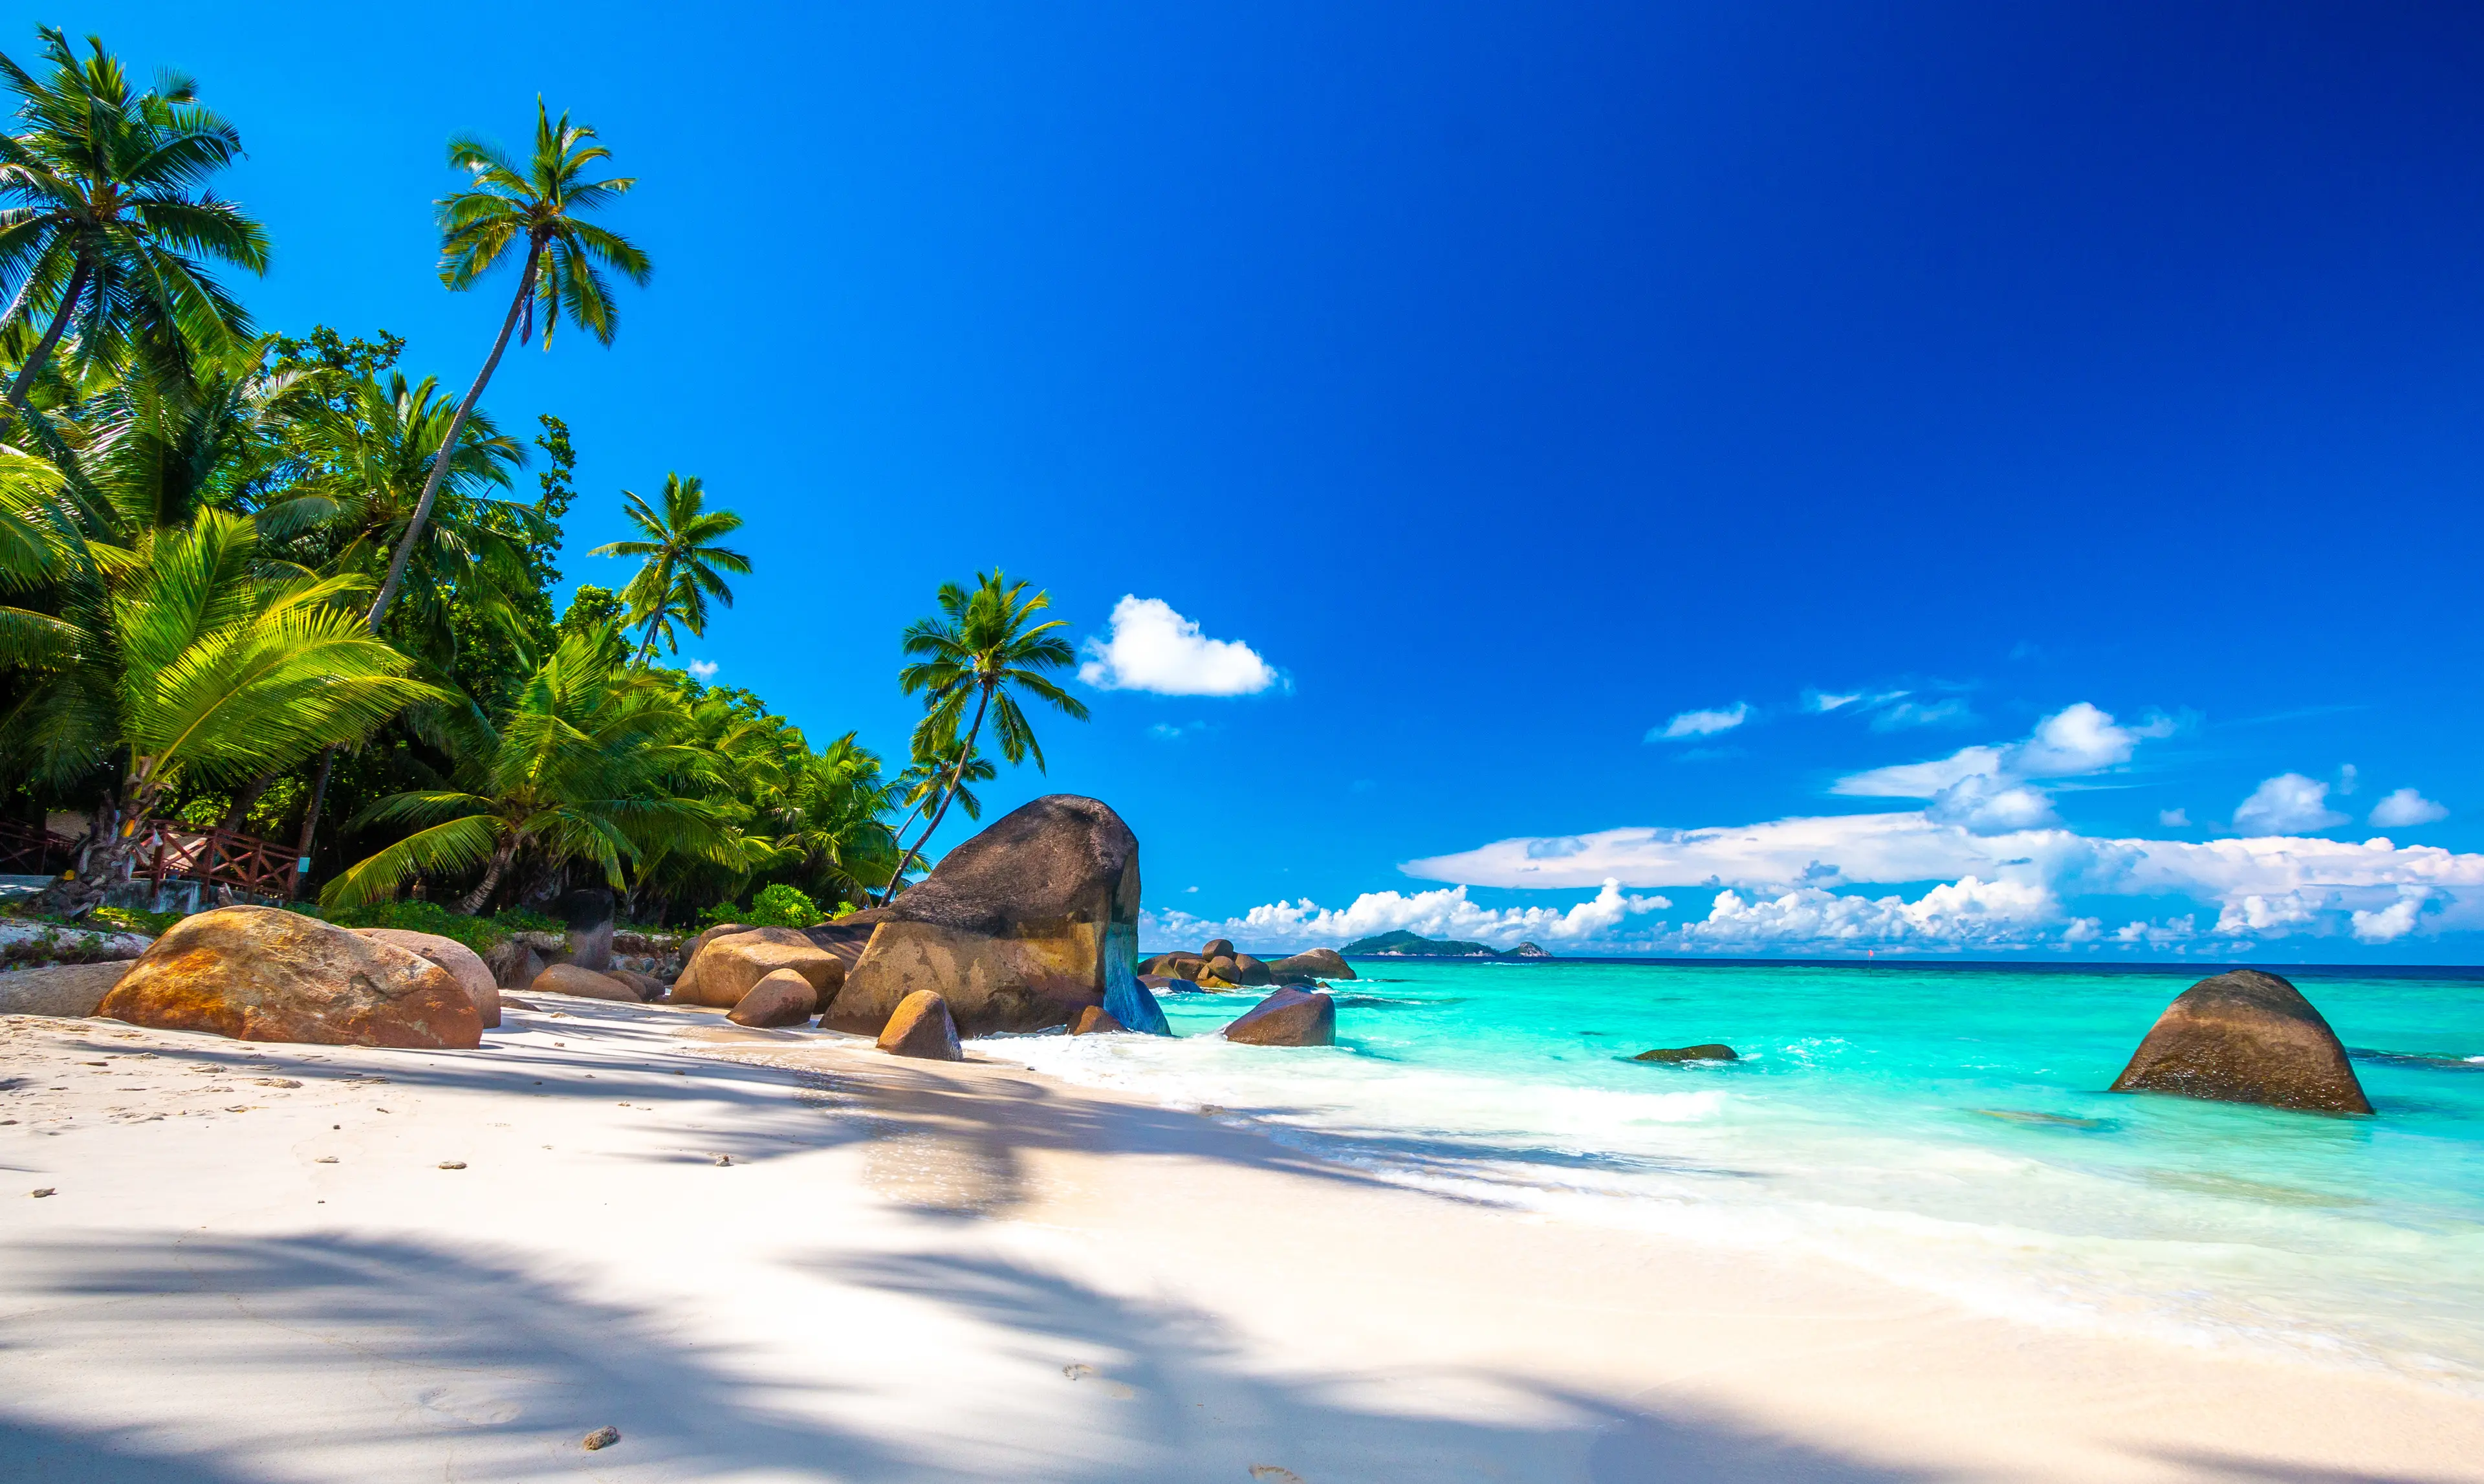 Solo 1-Day Local Experience: Sightseeing & Relaxation in Seychelles